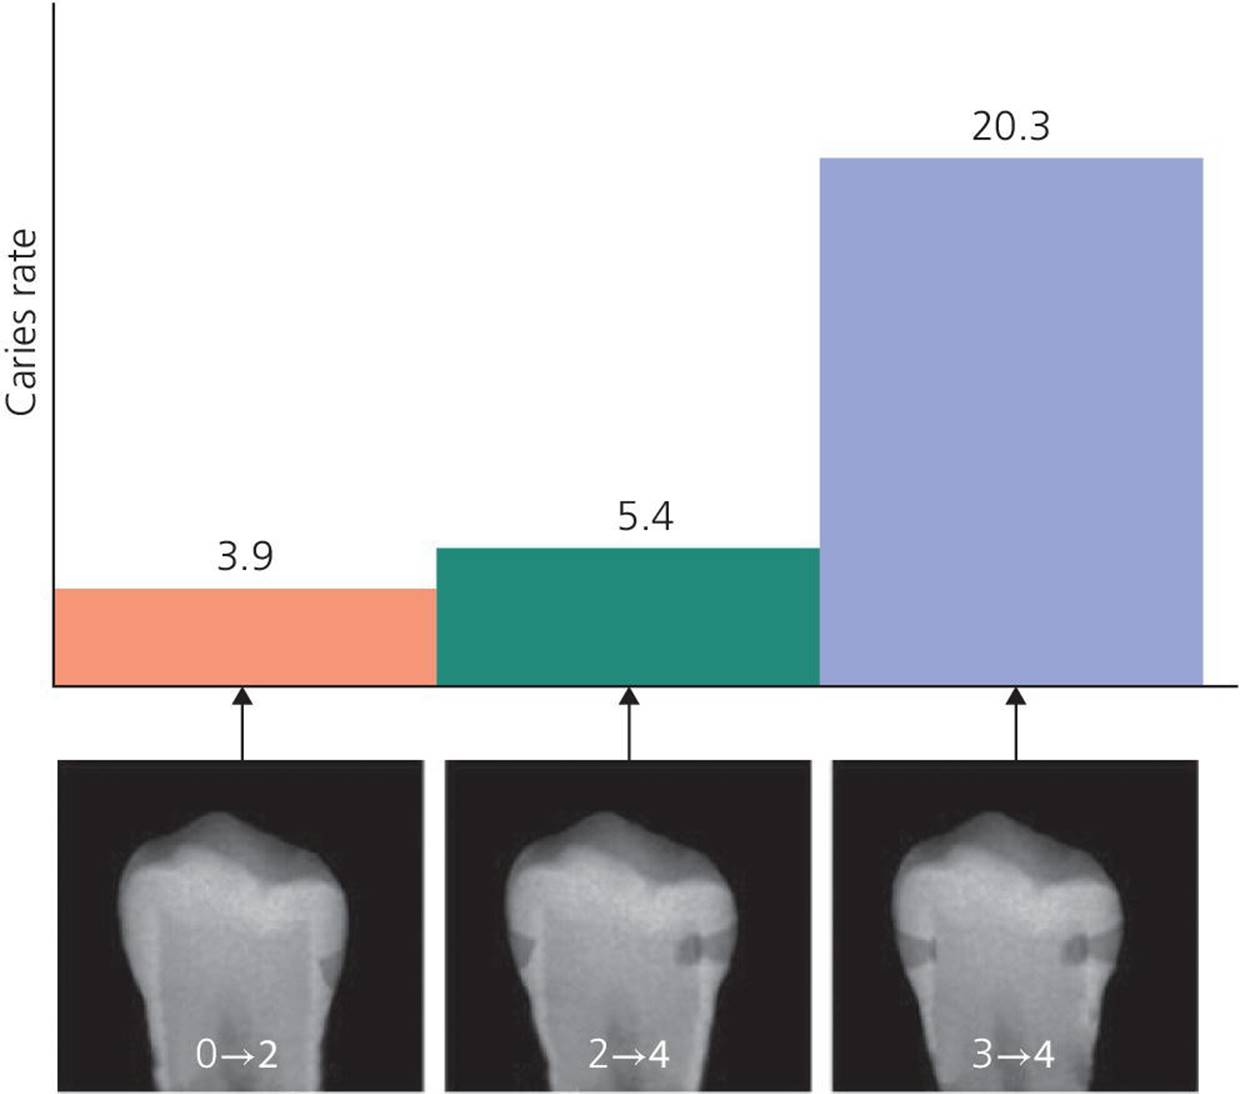 Three radiographs of a tooth illustrating the ninetieth percentiles of three progression states: from 0 to 2, from 2 to 4, and from 3 to 4.